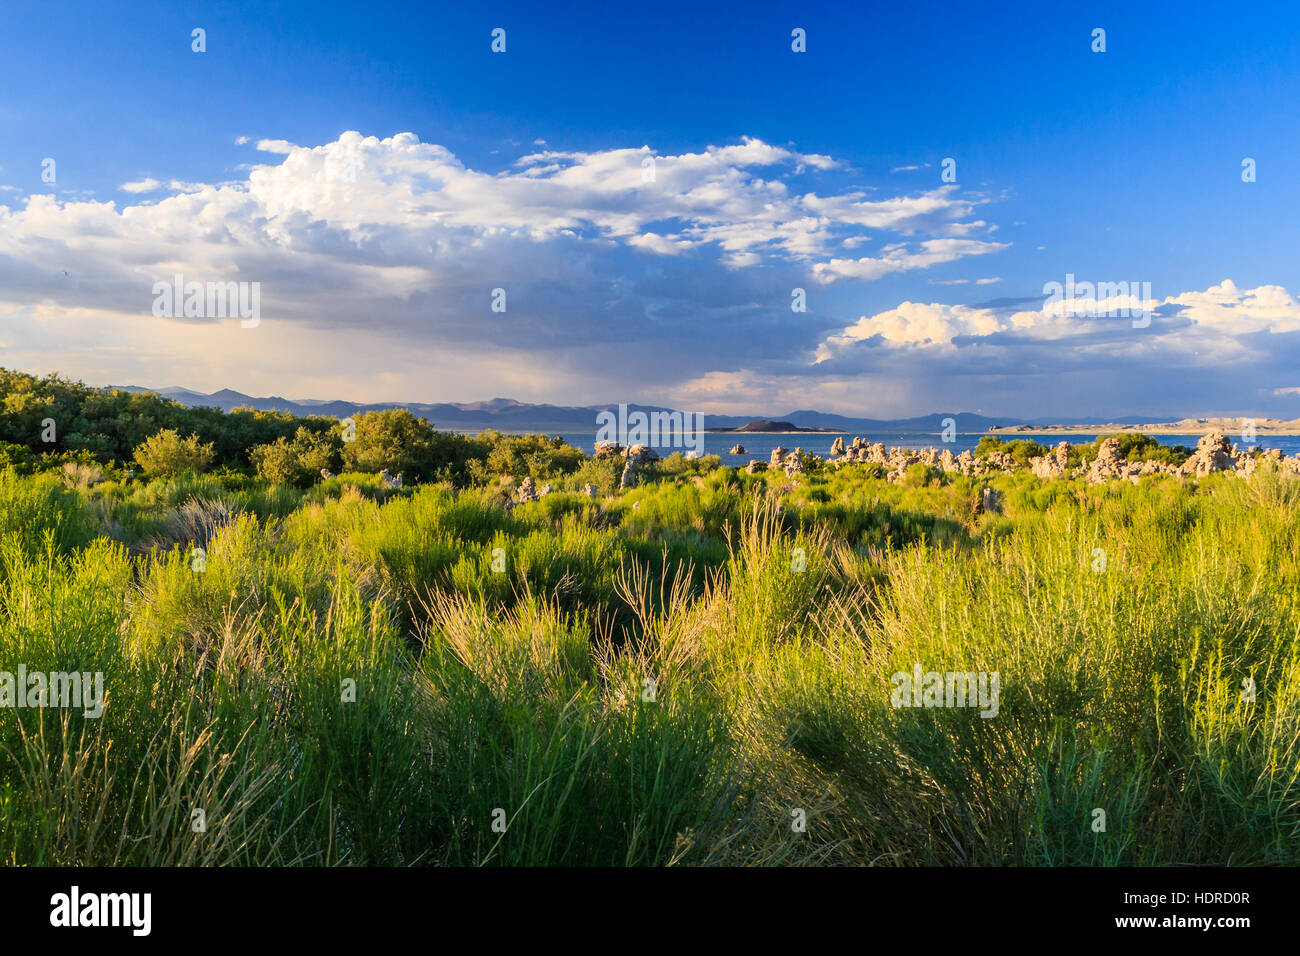 Mono Lake is a large, shallow saline soda lake in Mono County, California, formed at least 760,000 years ago as a terminal lake in an endorheic basin. Stock Photo